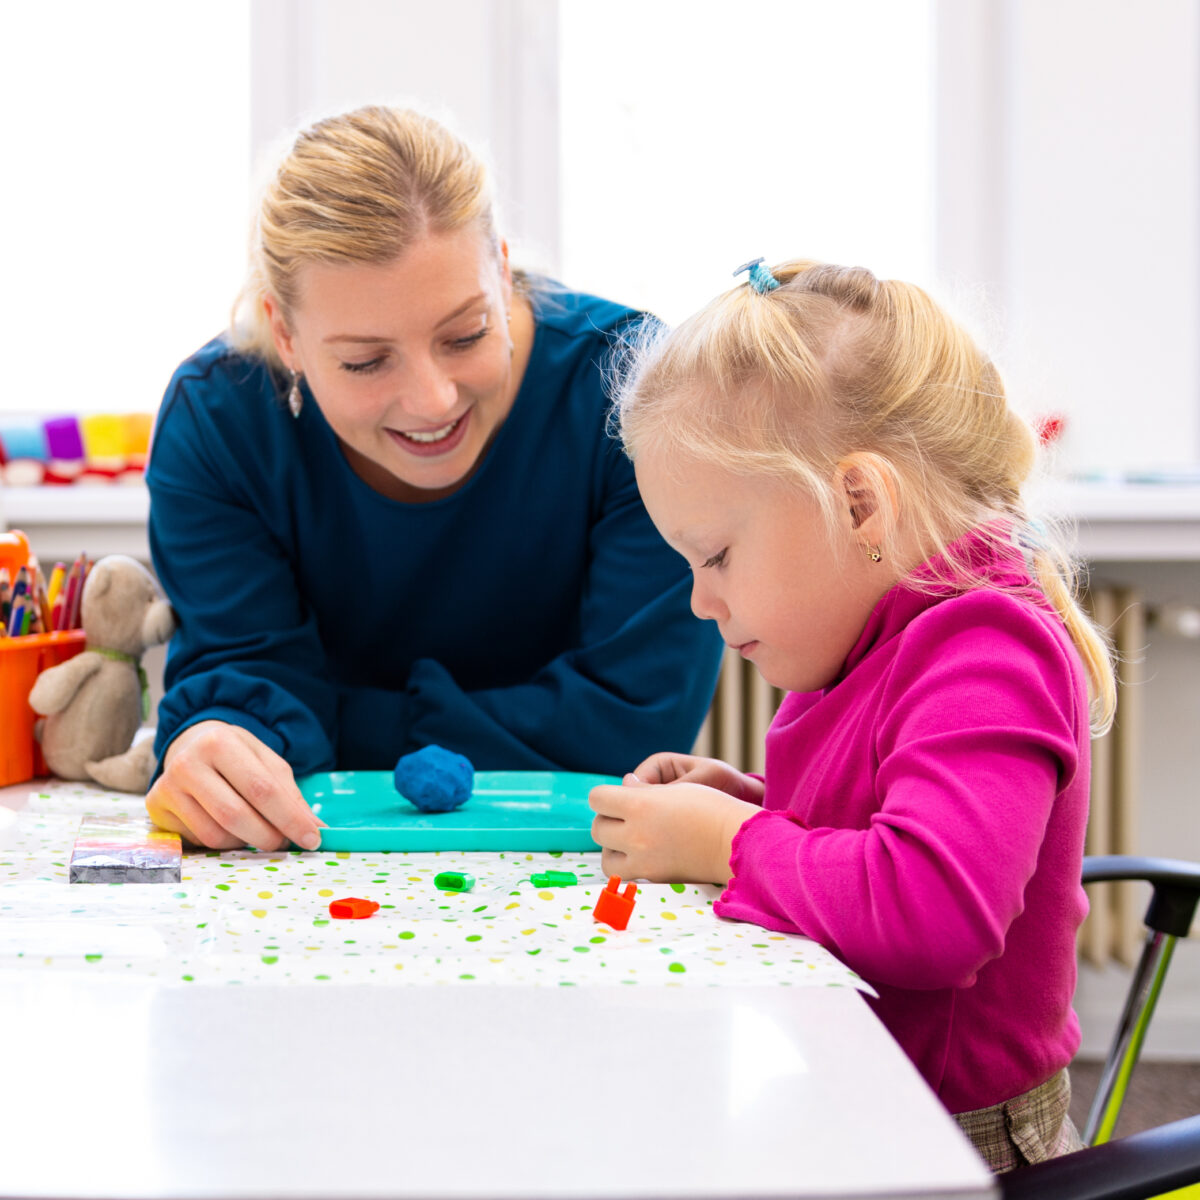 A Short Guide to Occupational Therapy and Children’s Education: How They Help